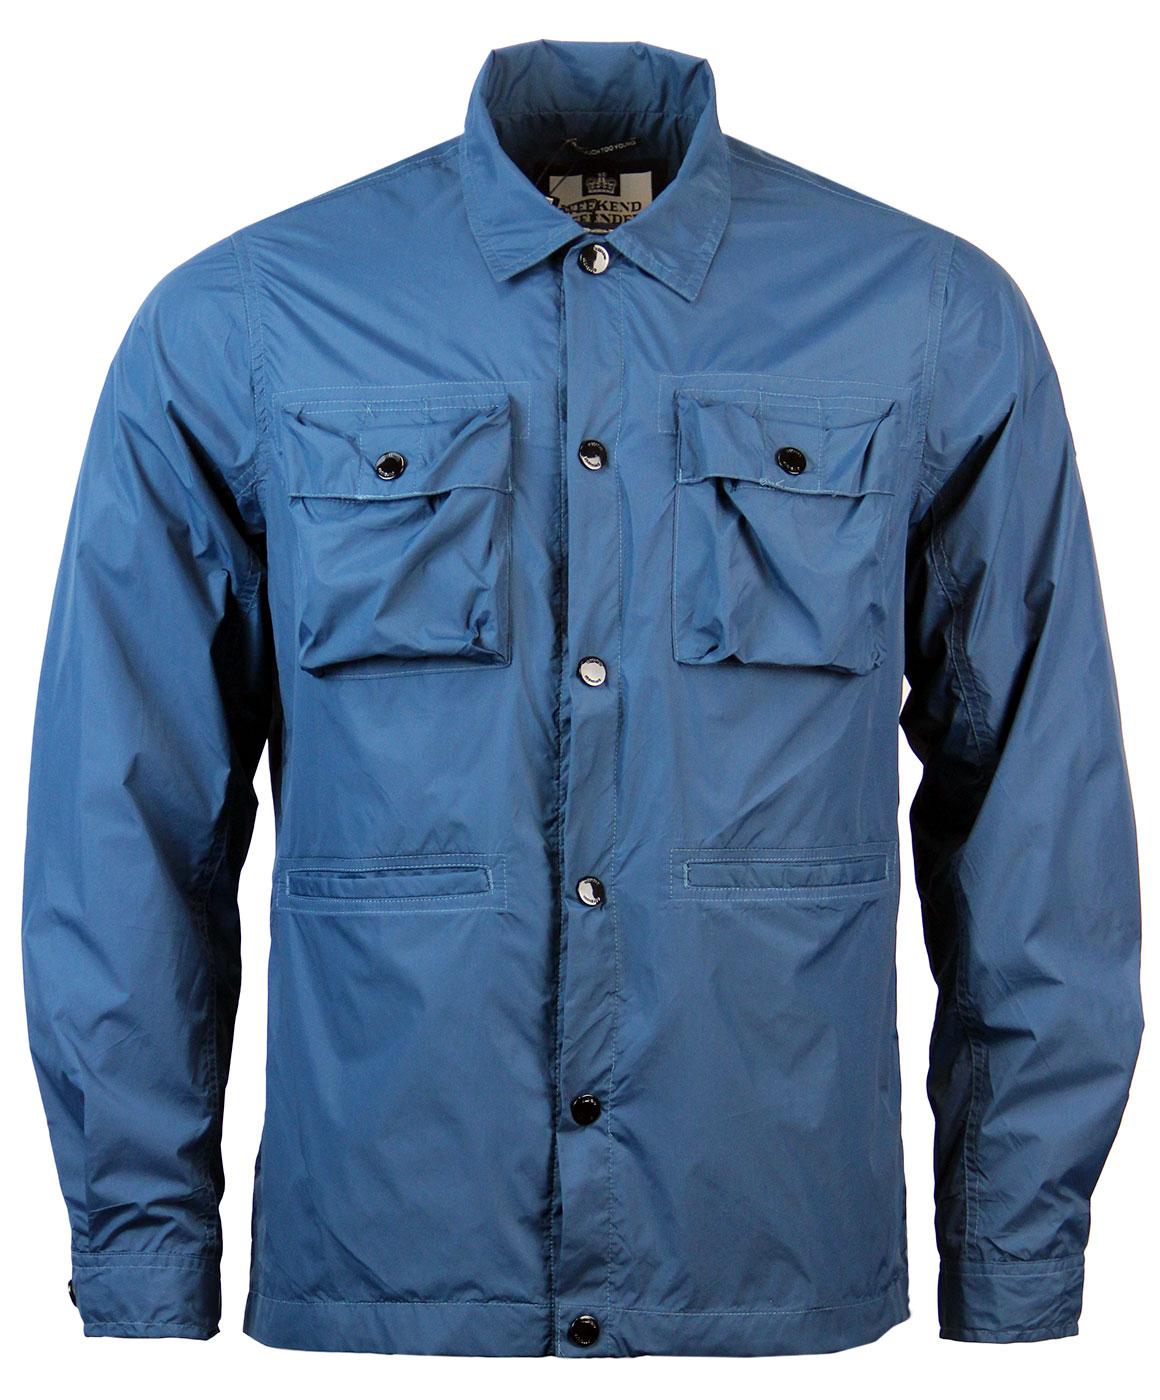 Mens WEEKEND OFFENDER Clothing  WEEKEND OFFENDER Shirts, Coats